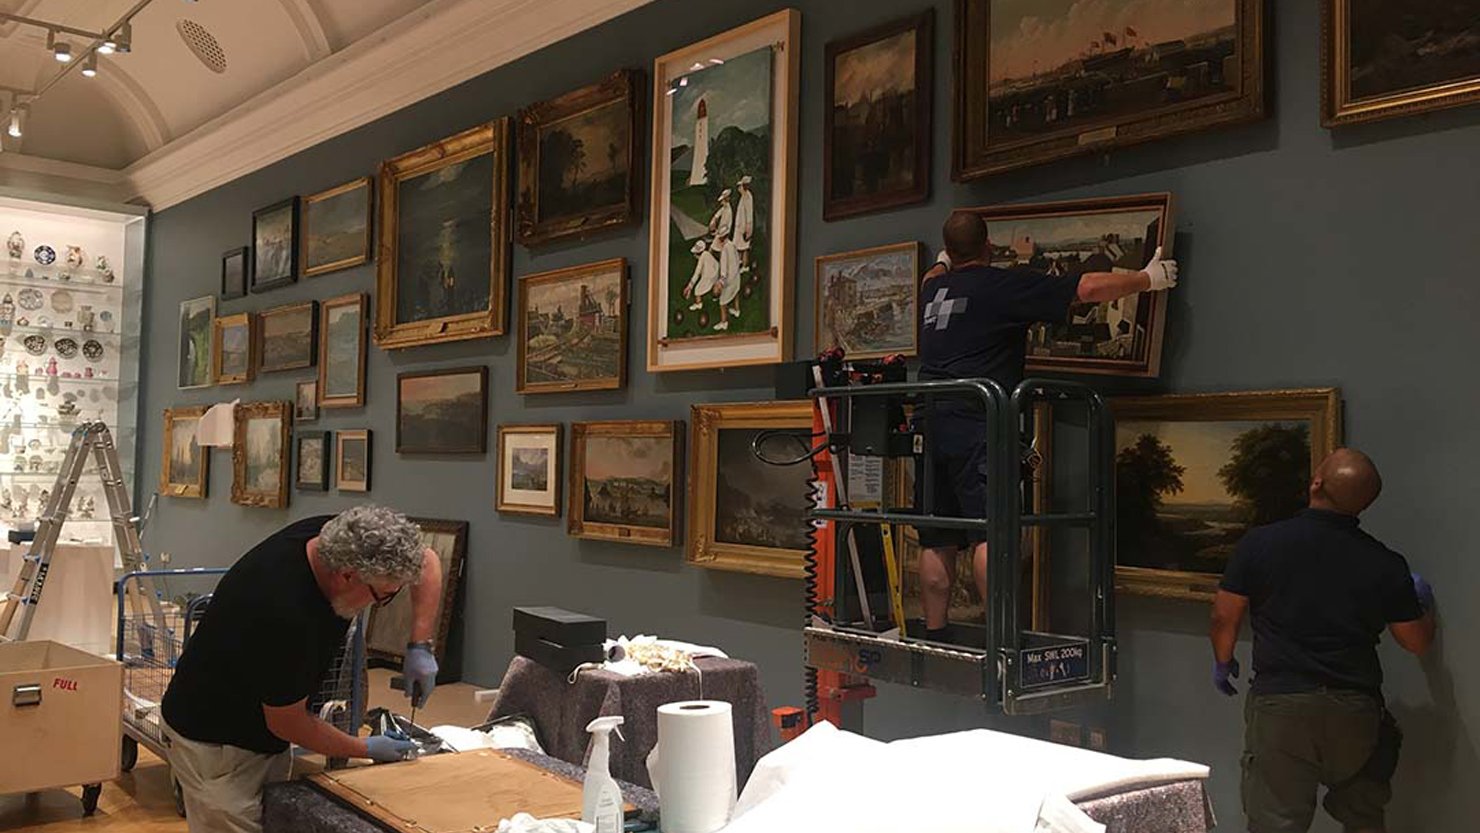 Installing the 'Plymouth Panorama' at The Box, Plymouth